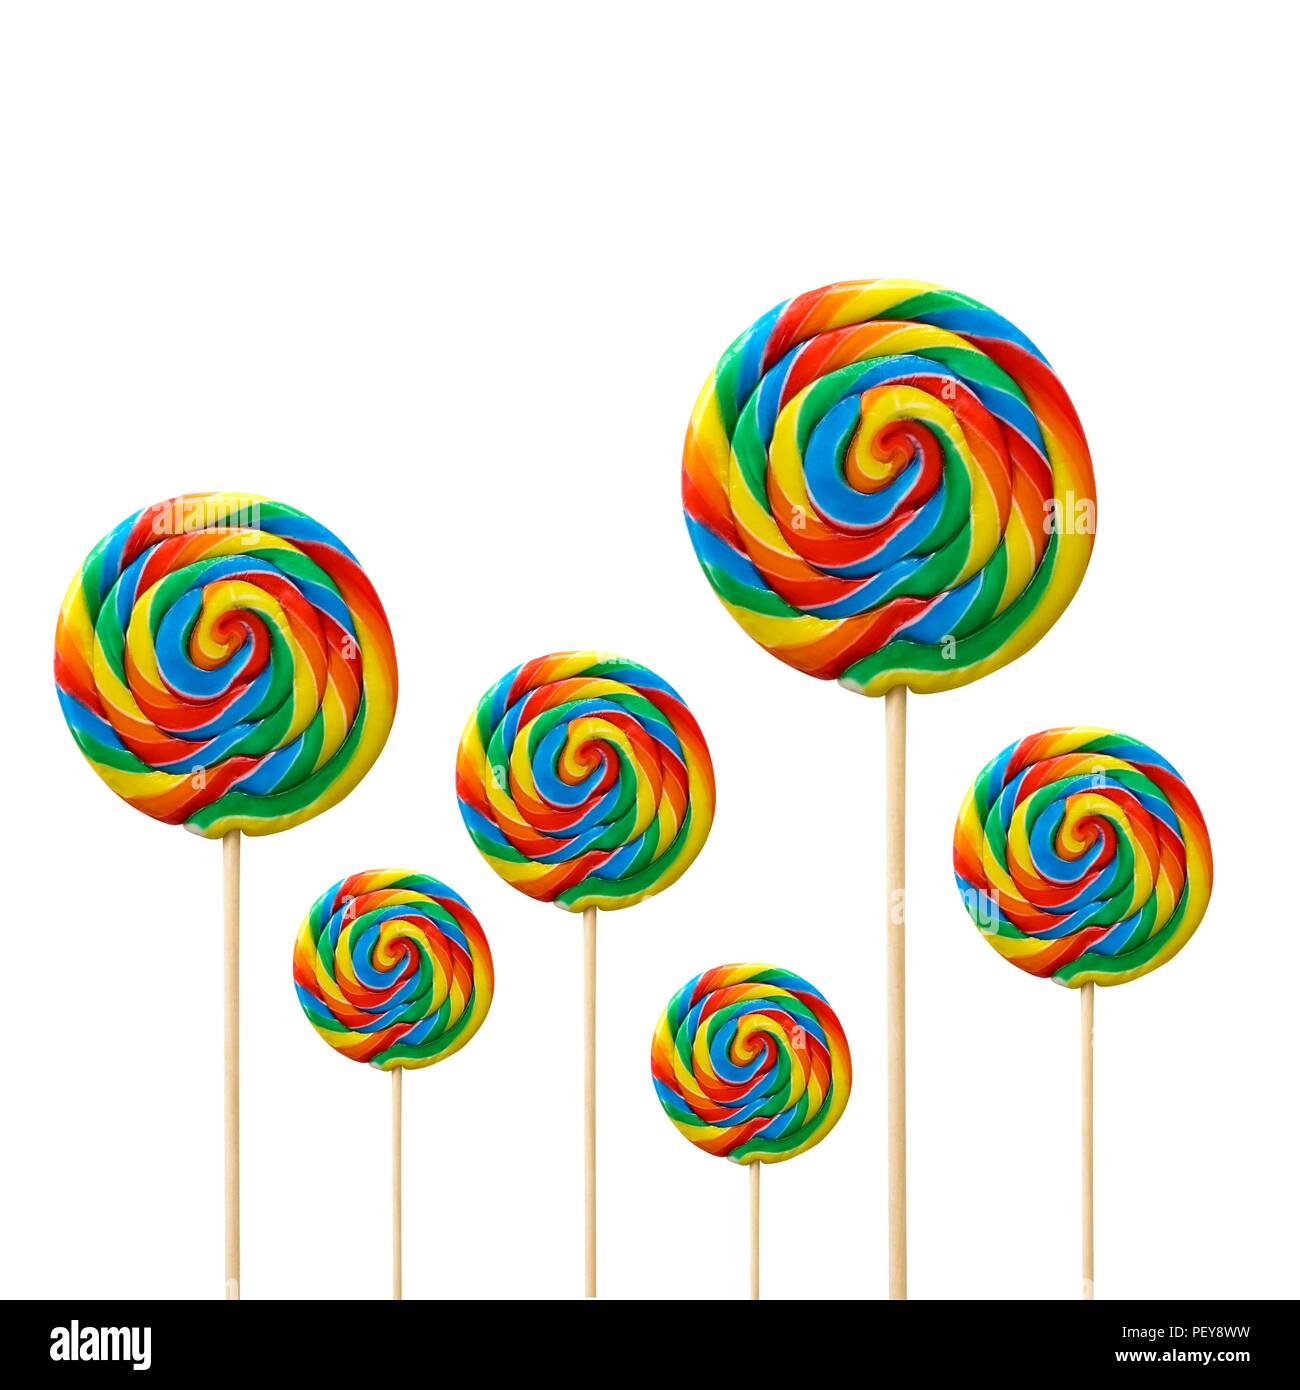 Bright coloured lollipops against a white background. Stock Photo